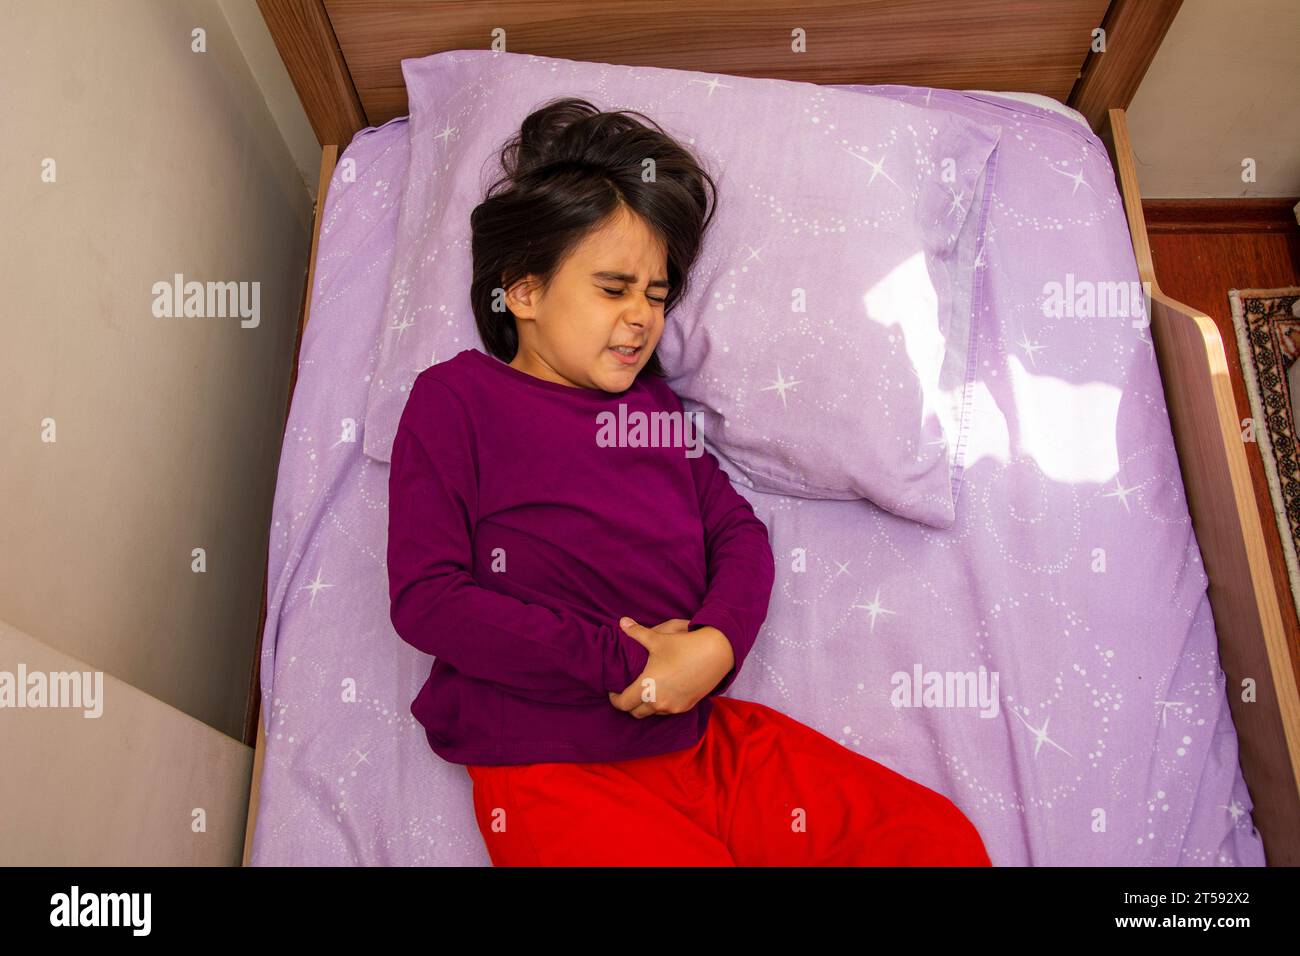 Top view of a little girl lying in bed with abdominal pain Stock Photo